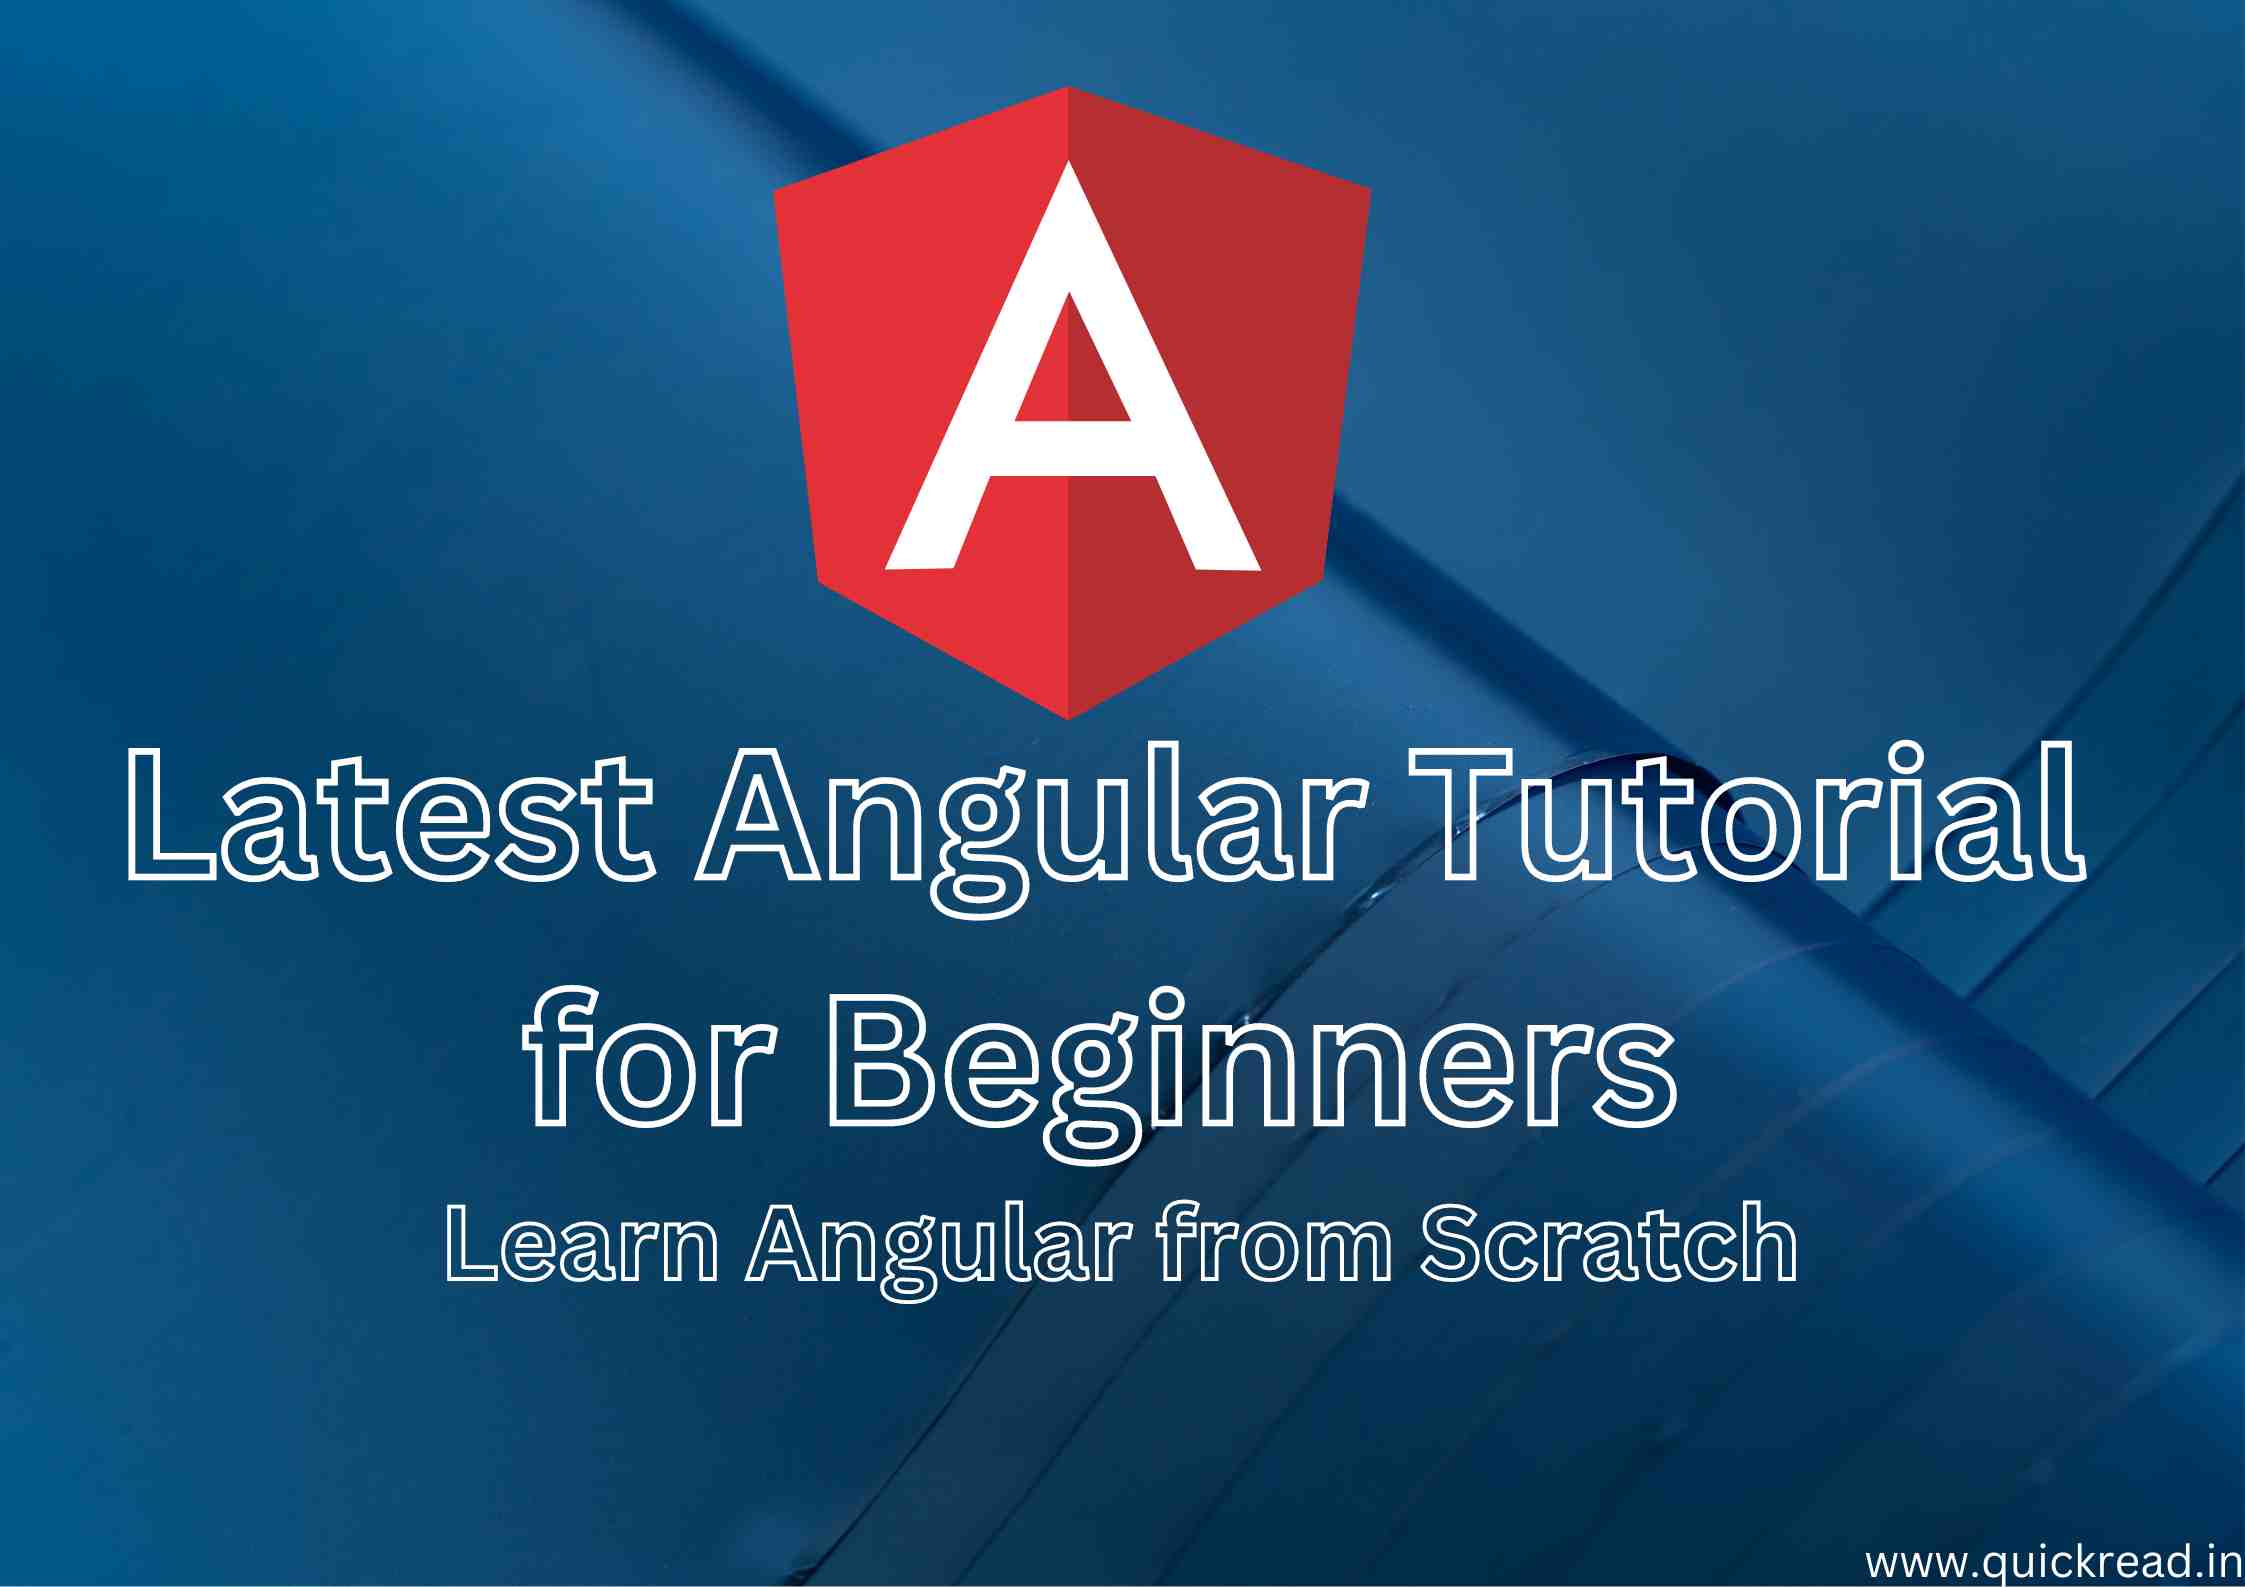 Latest Angular Tutorial for Beginners Learn Angular from Scratch